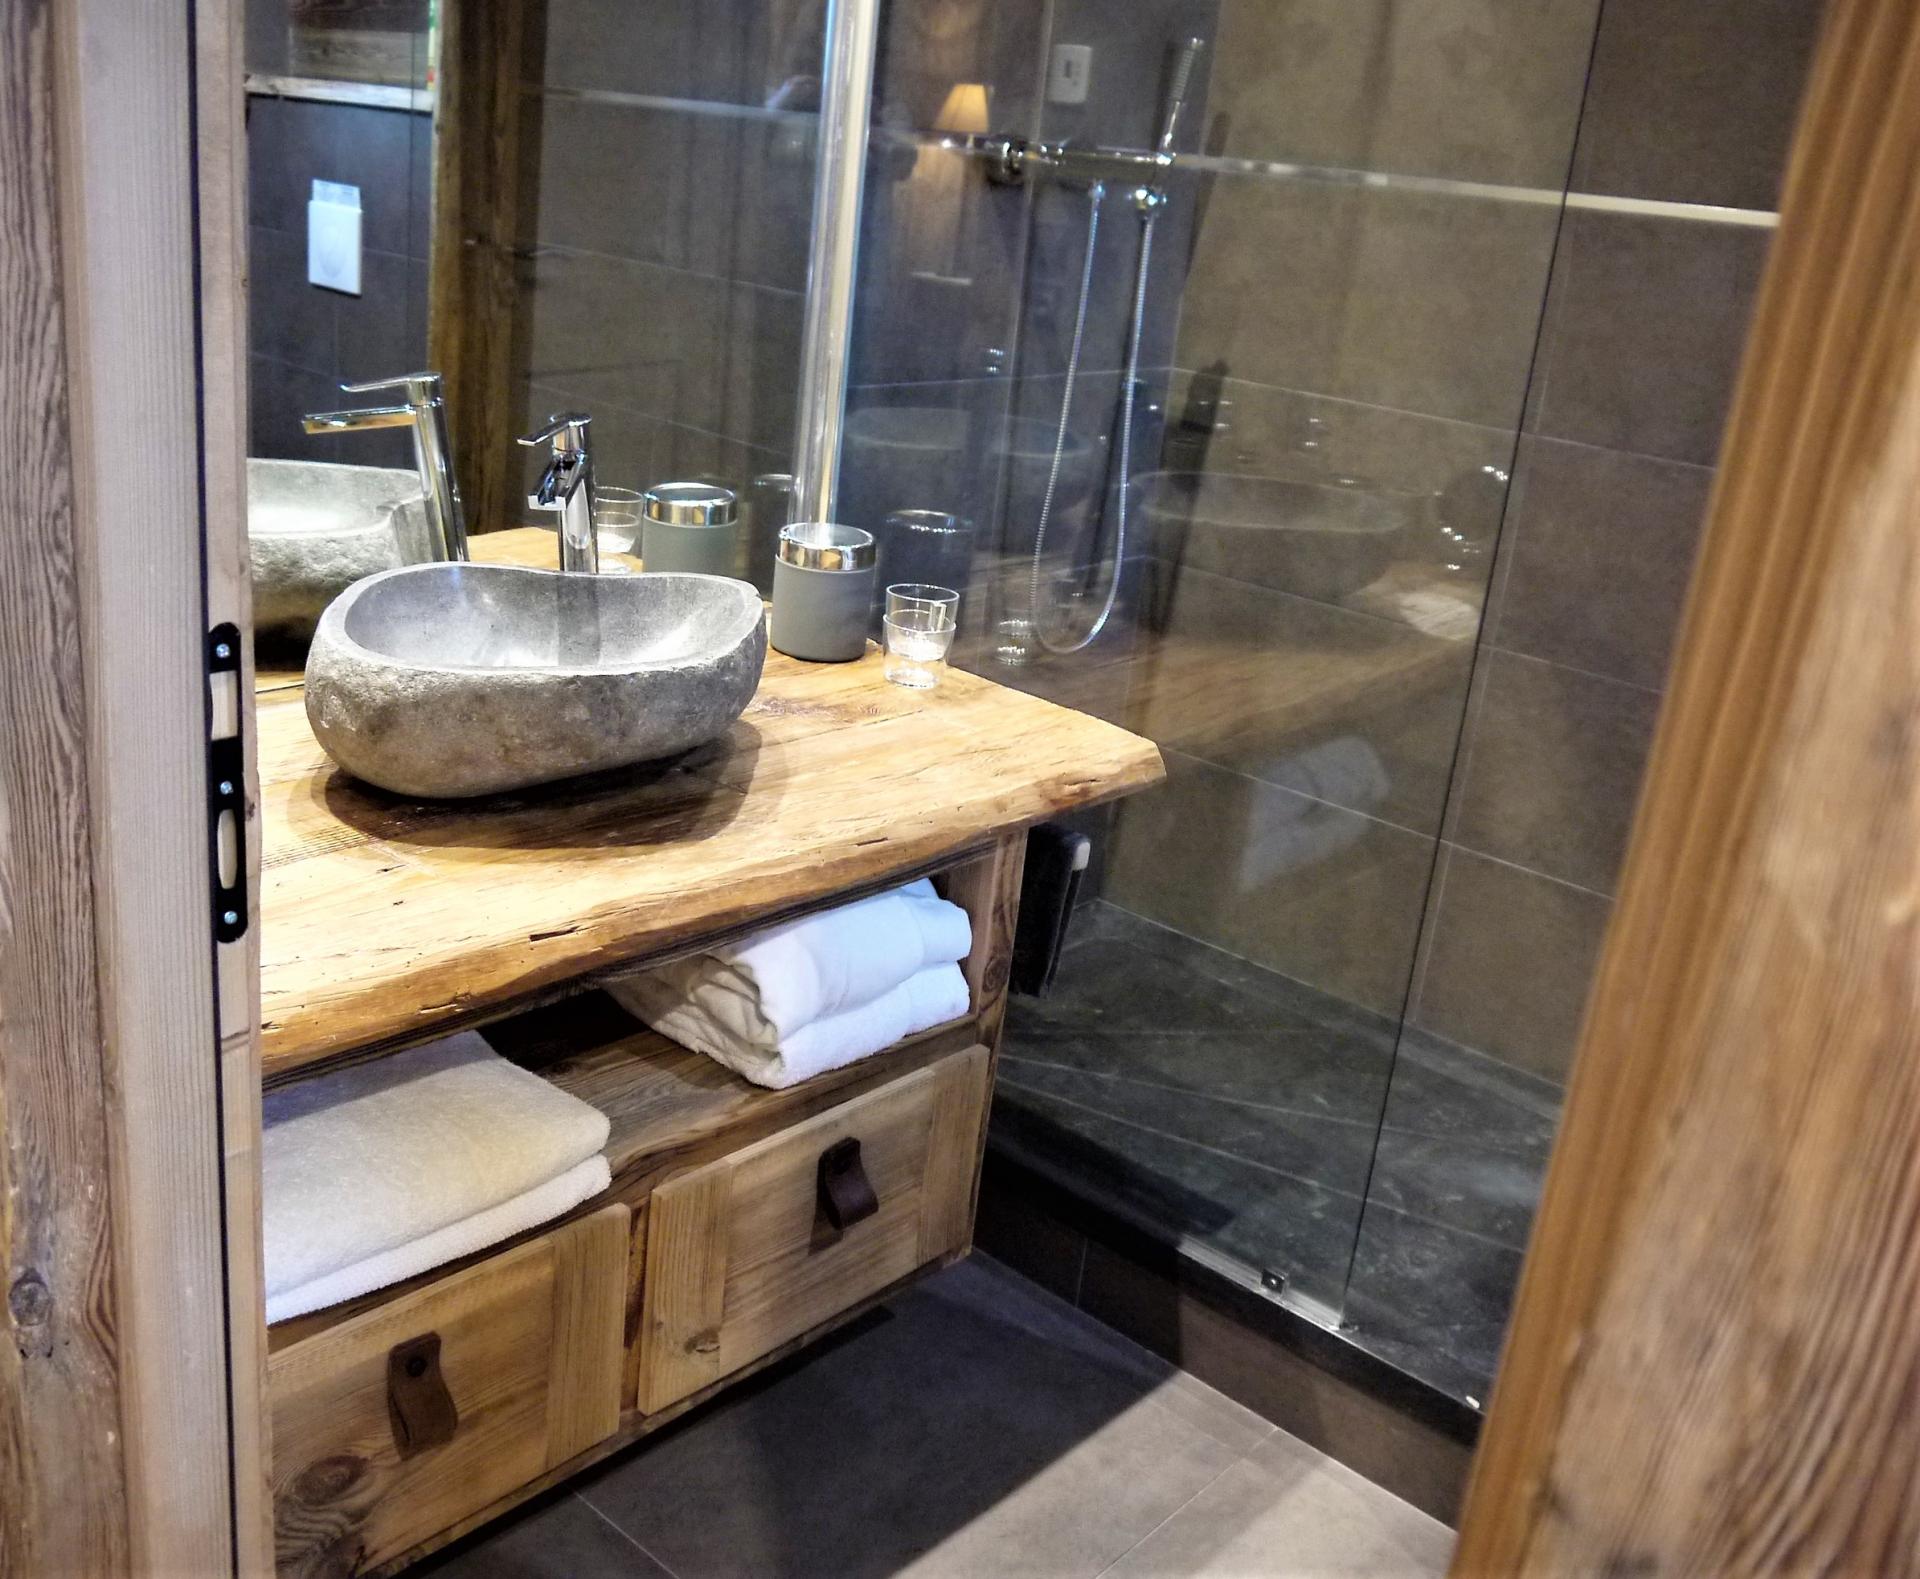 NEARLY ALL BEDROOMS ARE EQUIPPED WITH A BATHROOM  IN CHALET DE LA FERME